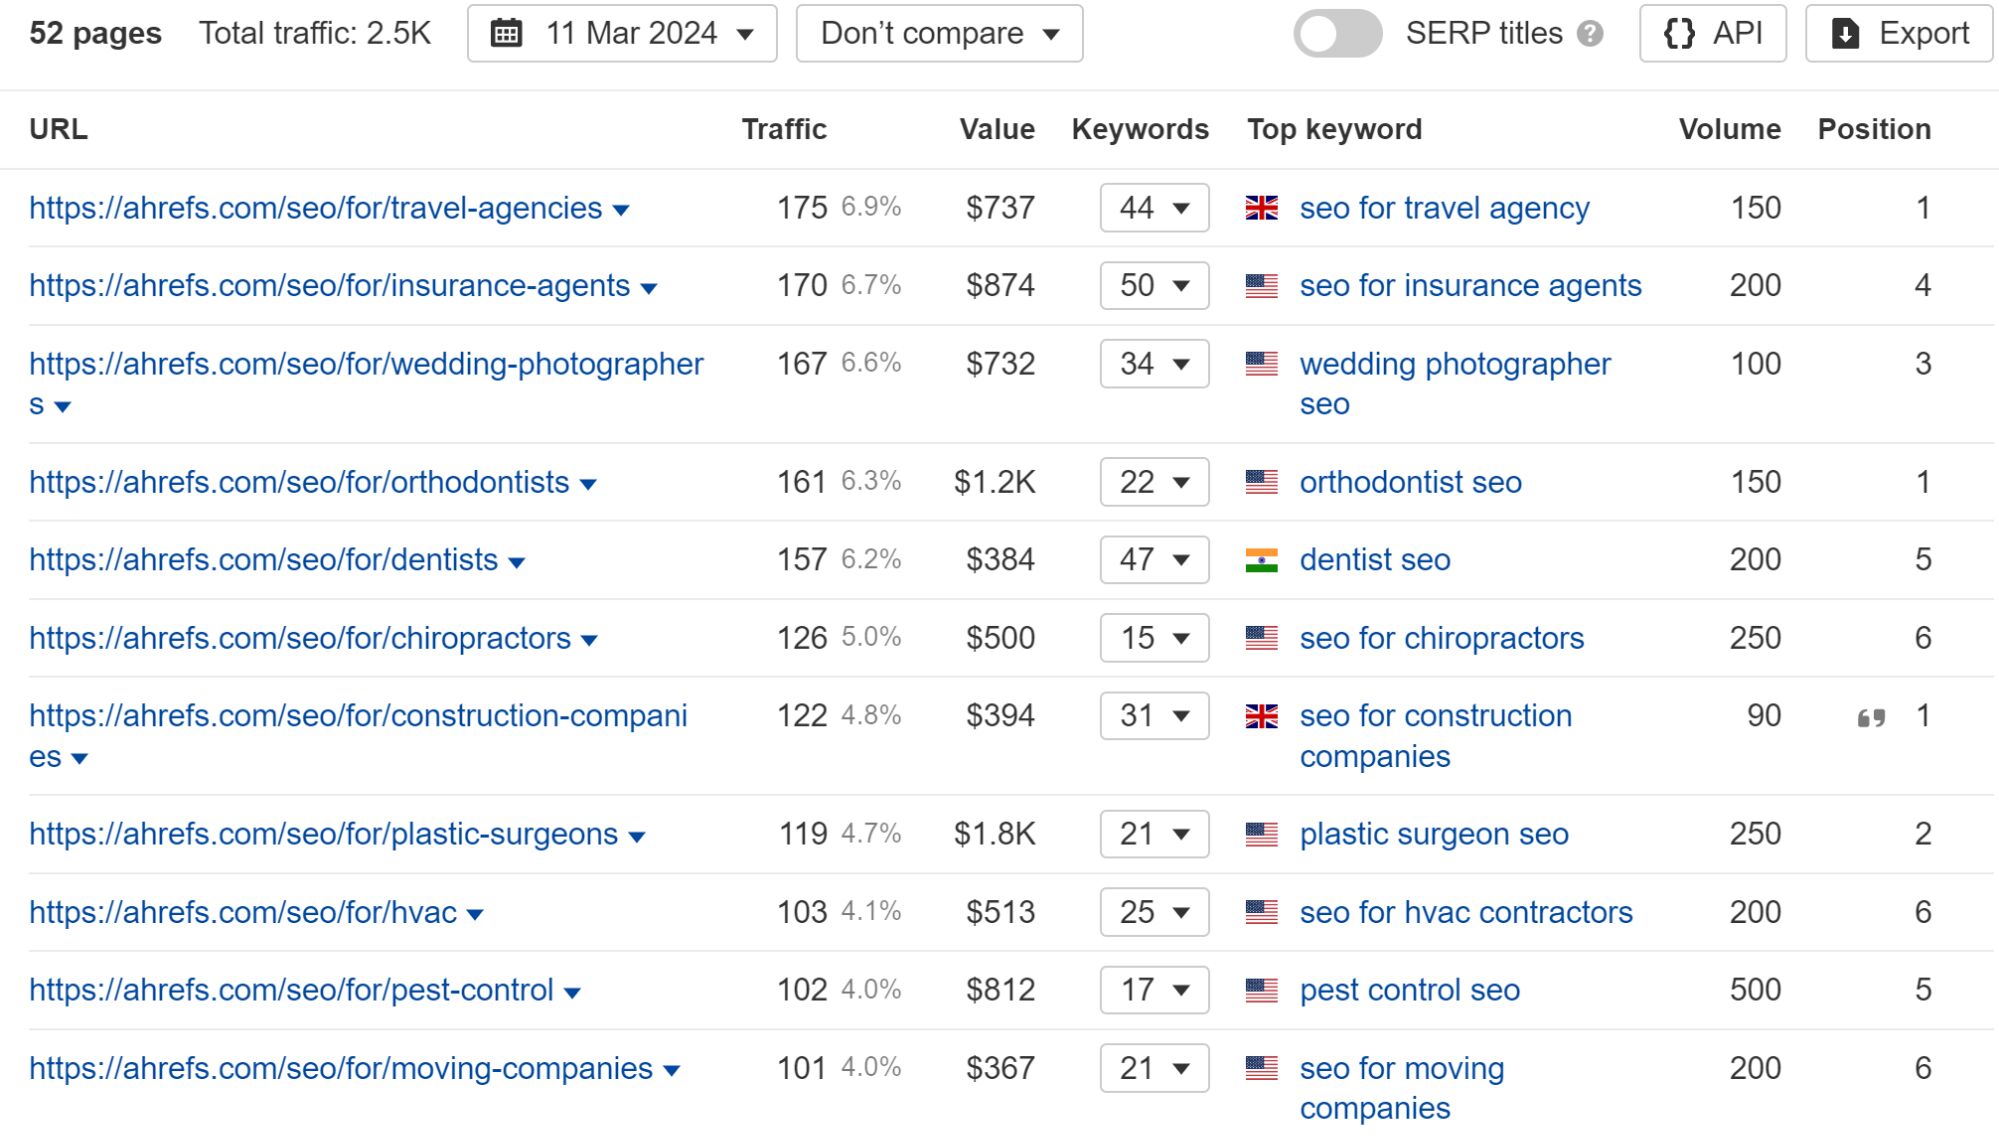 The success of our programmatic "SEO for x" pages, via Ahrefs' Site Explorer